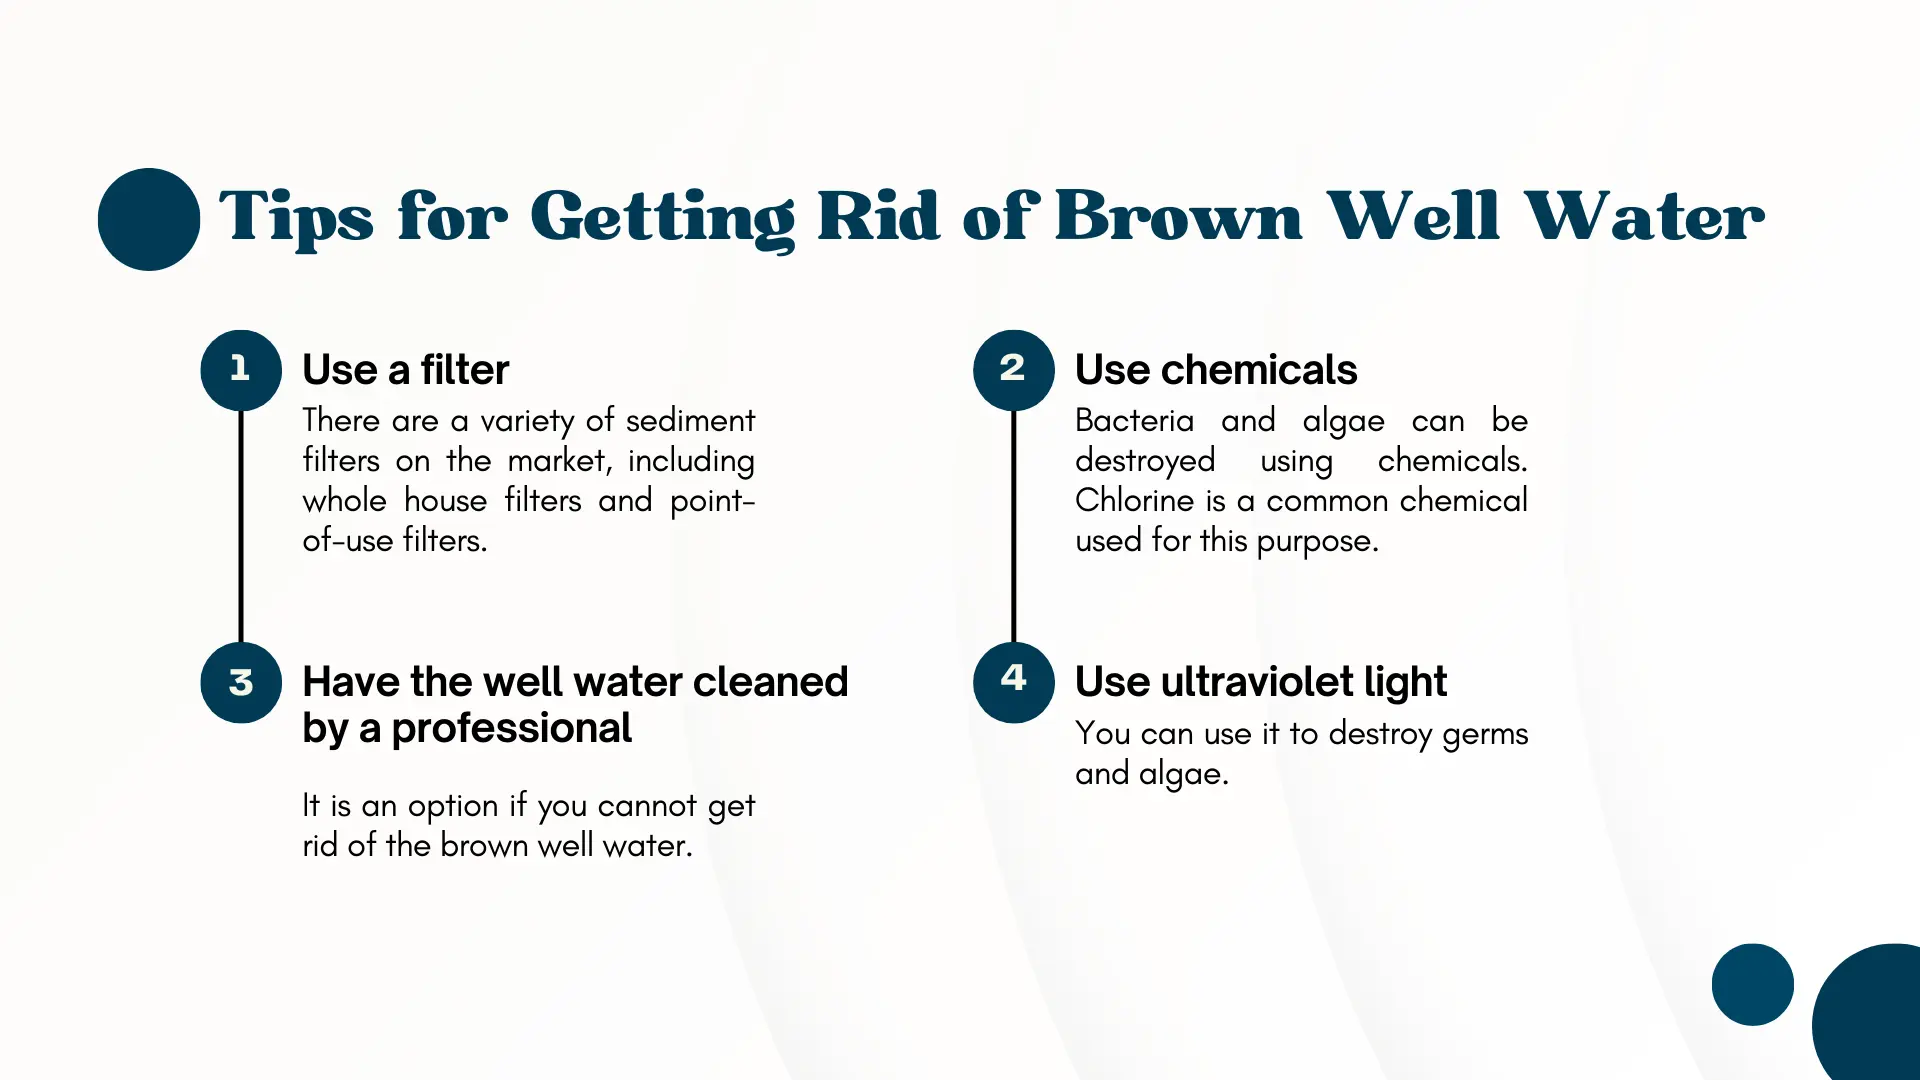 Tips for Getting Rid of Brown Well Water